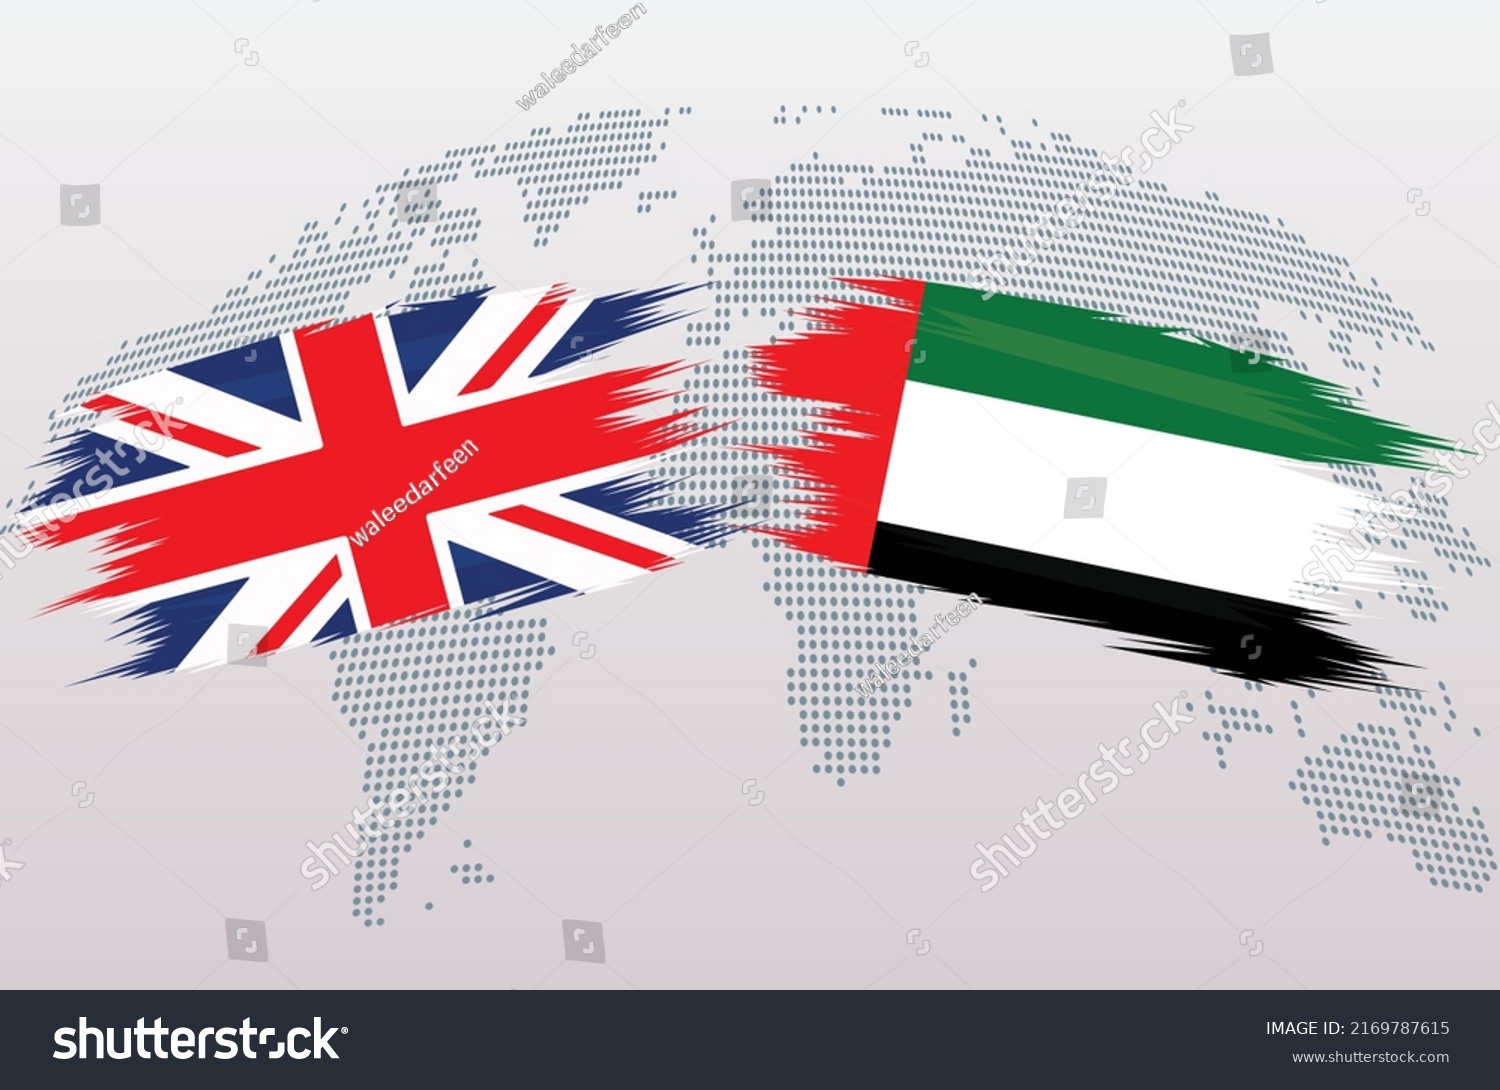 SVG of UK Great Britain and UAE flags. The United Kingdom and United Arab Emirates flags, isolated on grey world map background. Vector illustration. svg